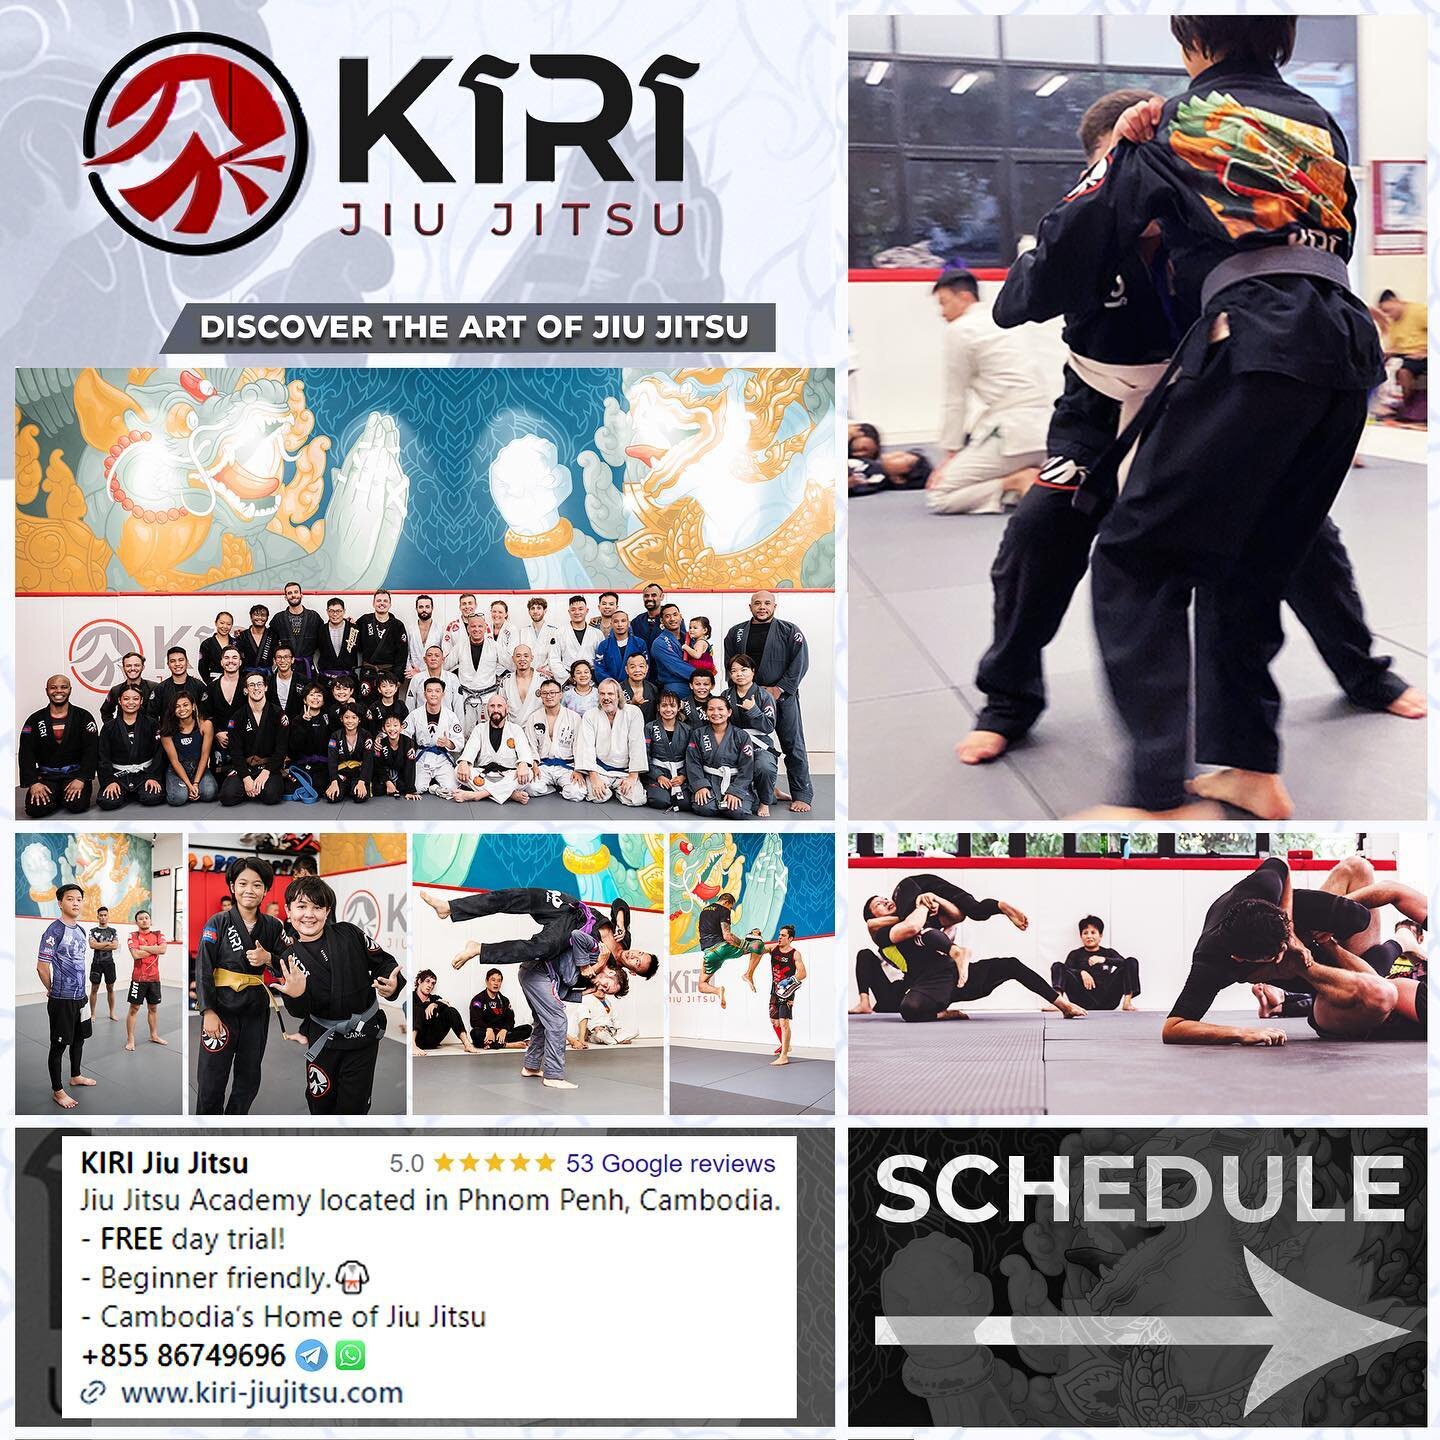 𝗝𝗶𝘂 𝗝𝗶𝘁𝘀𝘂, the ultimate 2024 activity!🥋🇰🇭

✅ 1 day 𝗳𝗿𝗲𝗲 trial!

👉 #Try out your first Jiu-Jitsu class for free by messaging us at: m.me/kirijiujitsu

Membership prices 👇🏻
1 month: $𝟵𝟱.-
3 months: $𝟮𝟱𝟬.-
6 months: $𝟰𝟱𝟬.-
1 ye